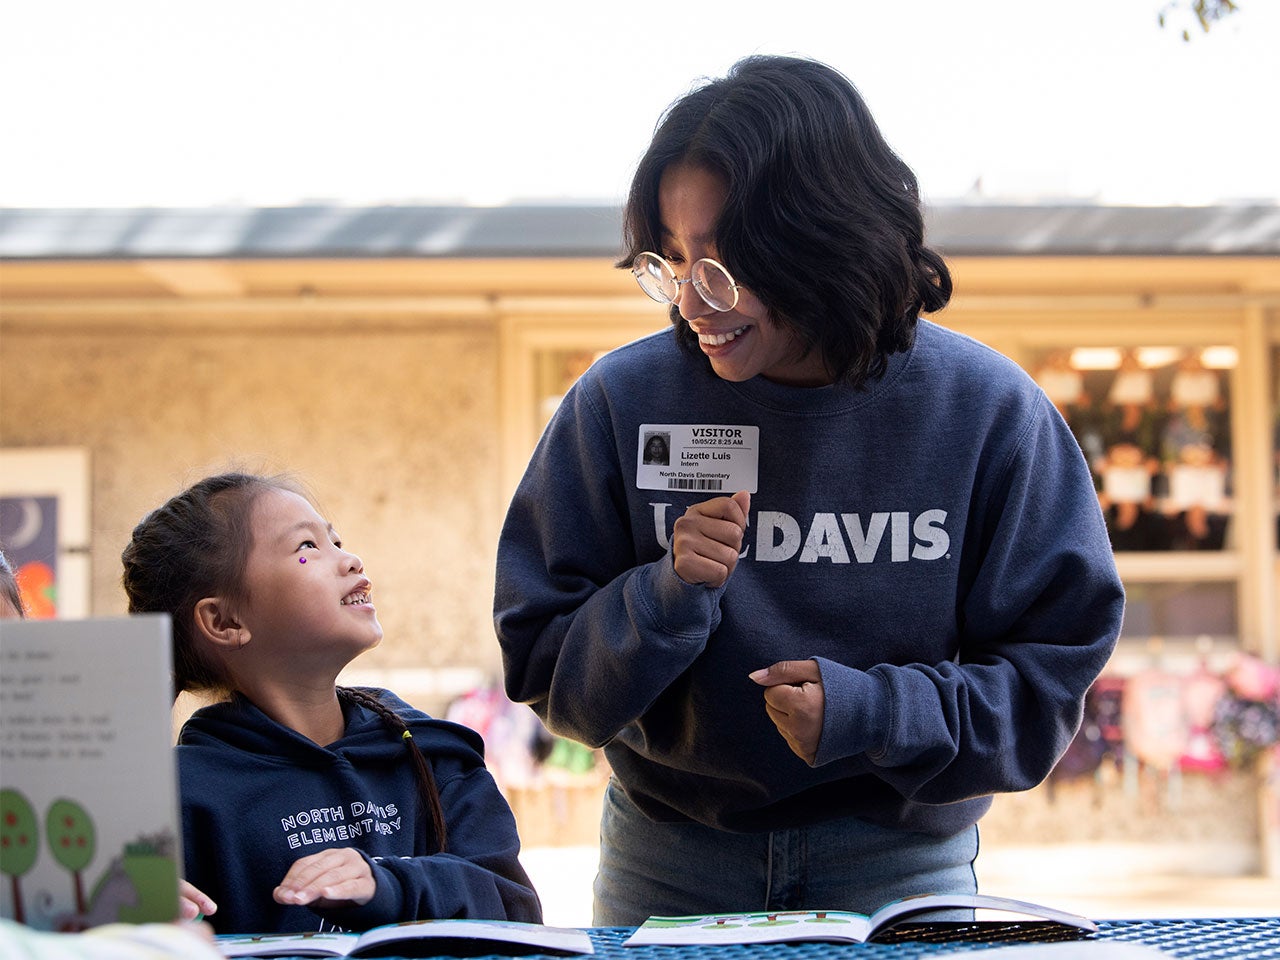 A student in a dark blue ˽̳ Davis sweater and round-rimmed glasses helps an elementary student read a picture book. The elementary student looks up at the ˽̳ Davis student with a big smile.